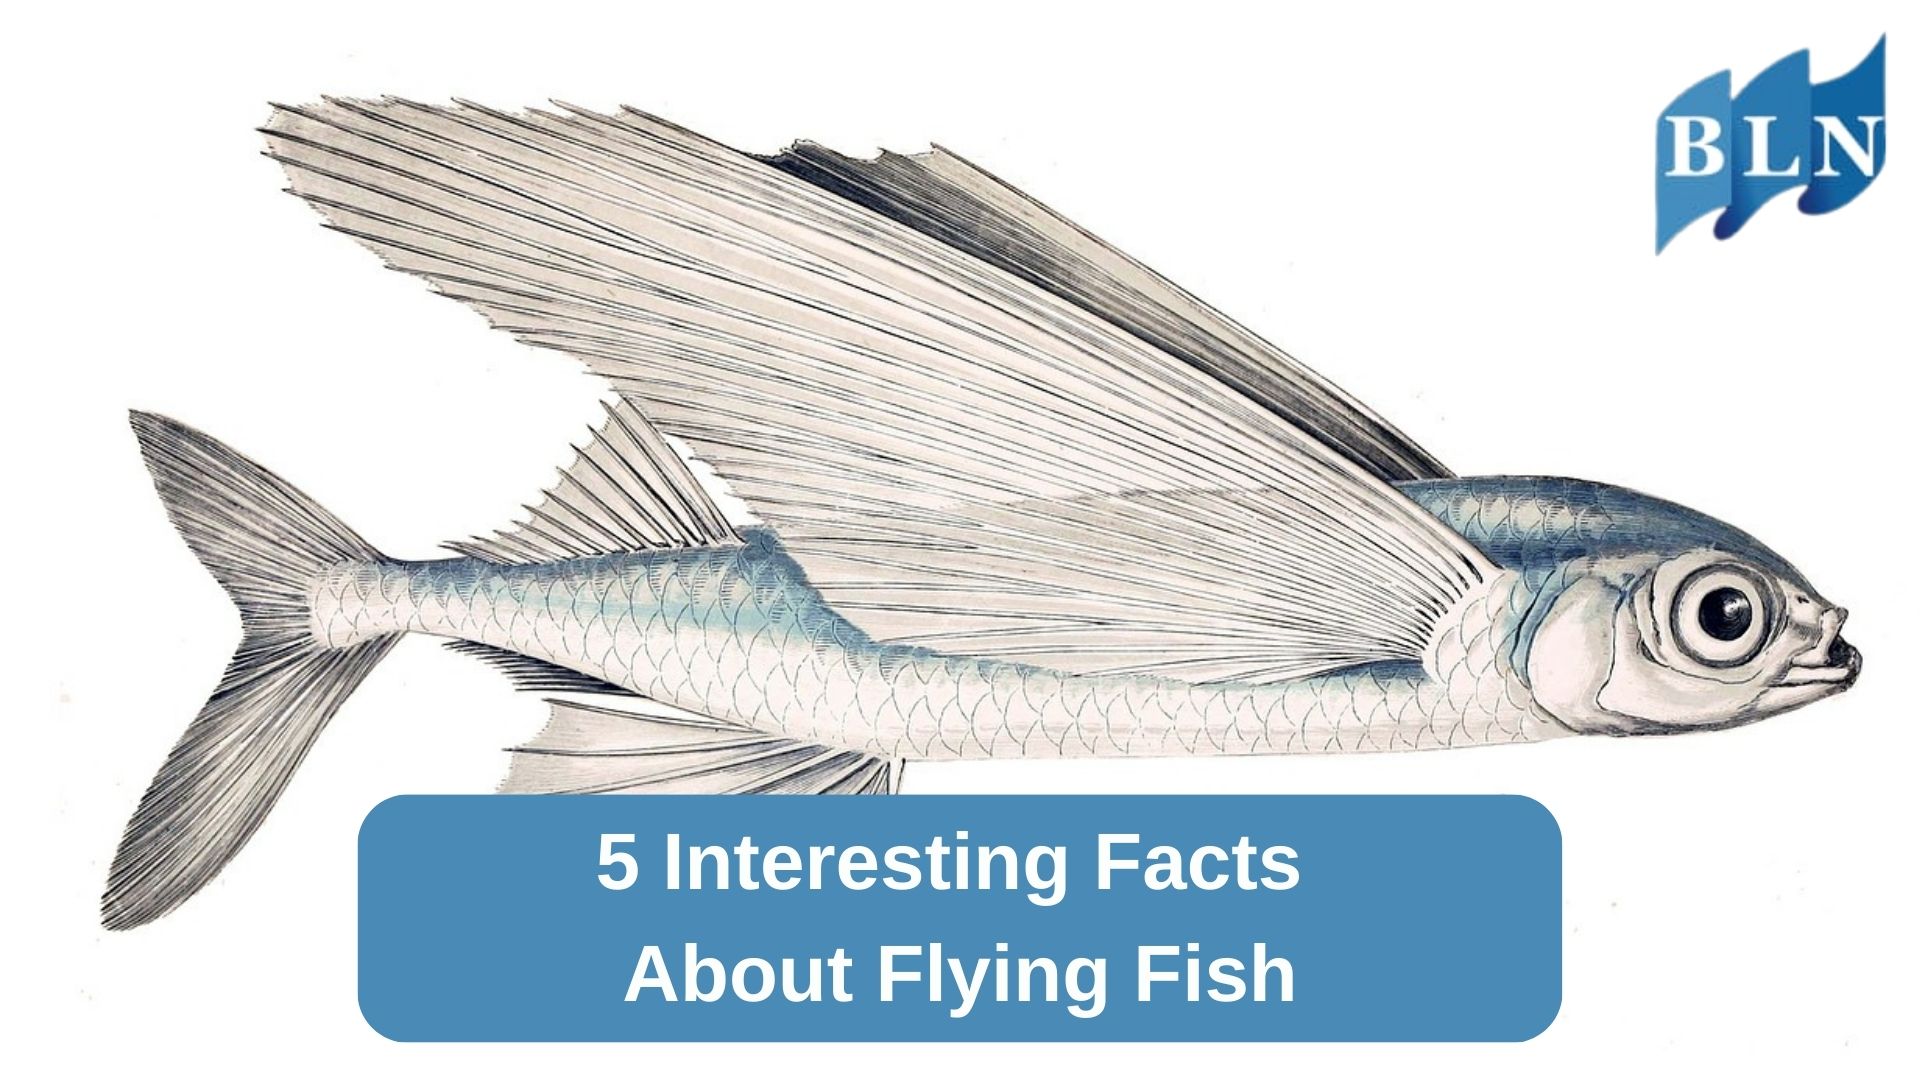 5 Interesting Facts About Flying Fish